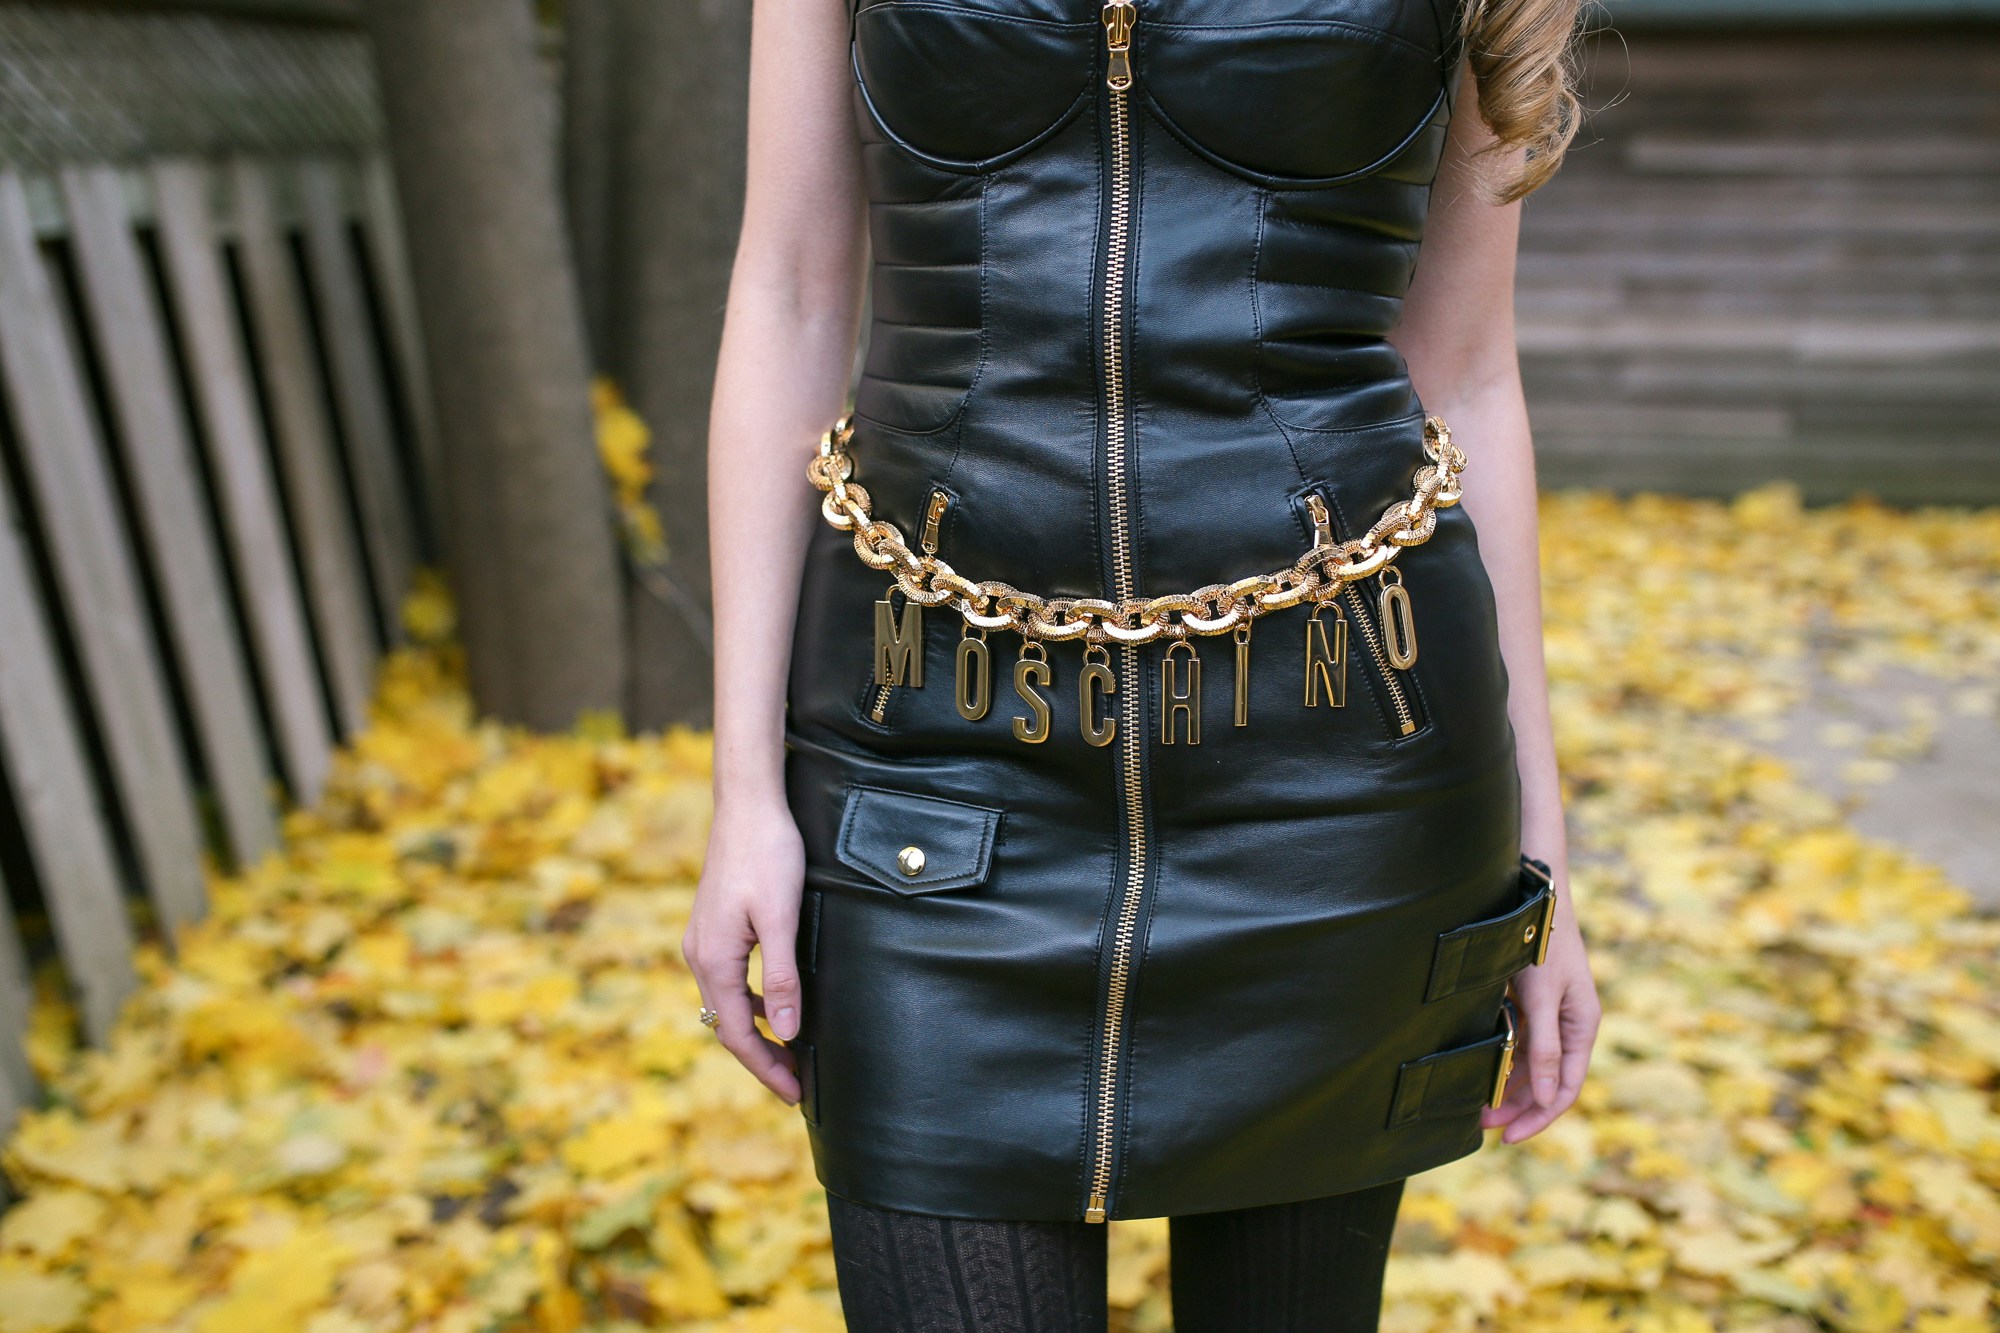 Moschino for H&M gold belt how to wear it